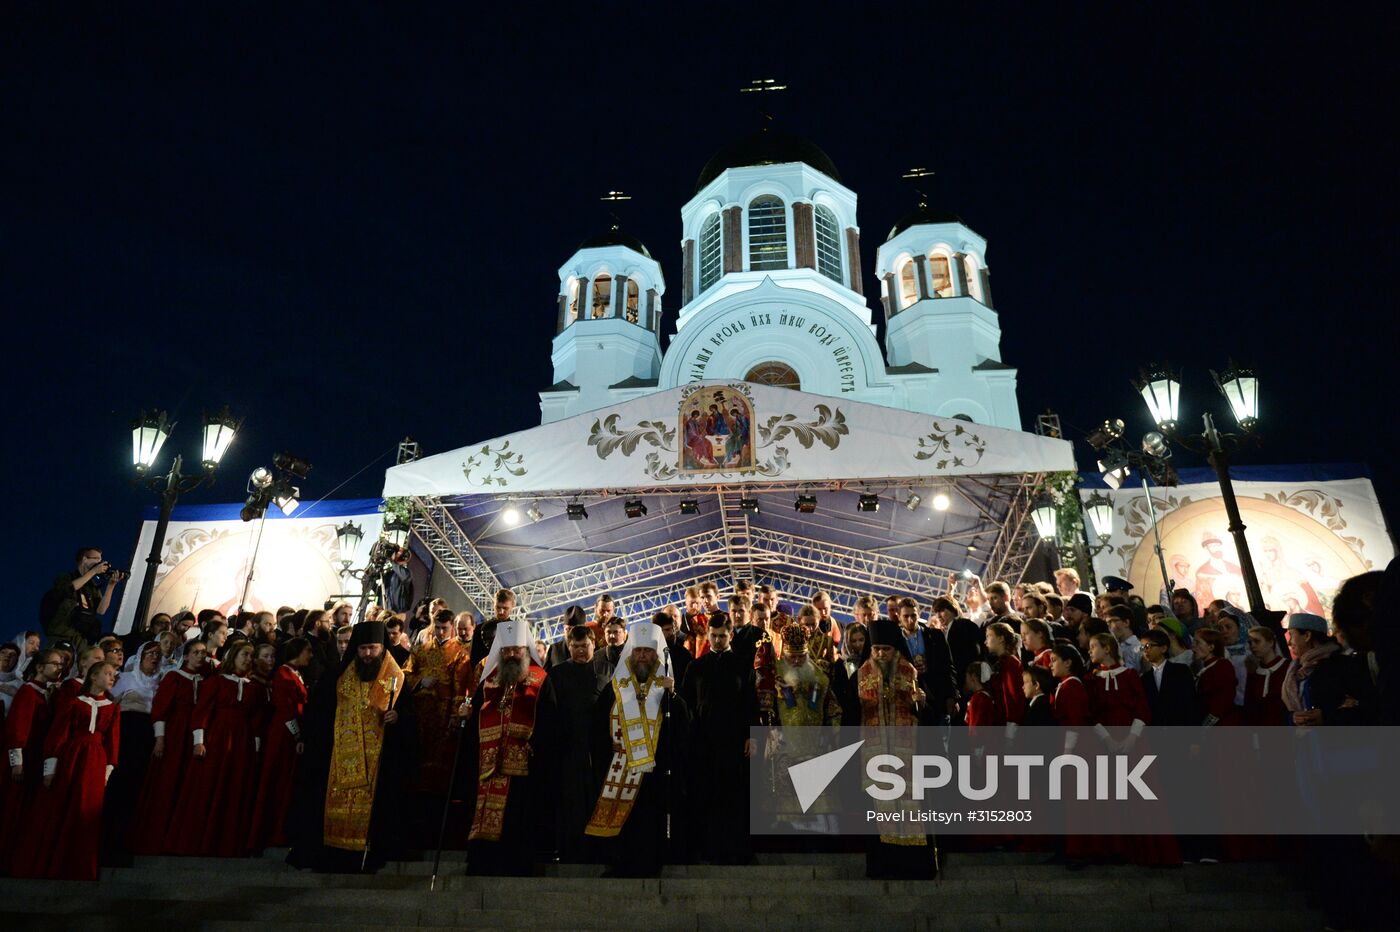 Tsarian religious procession in Yekaterinburg